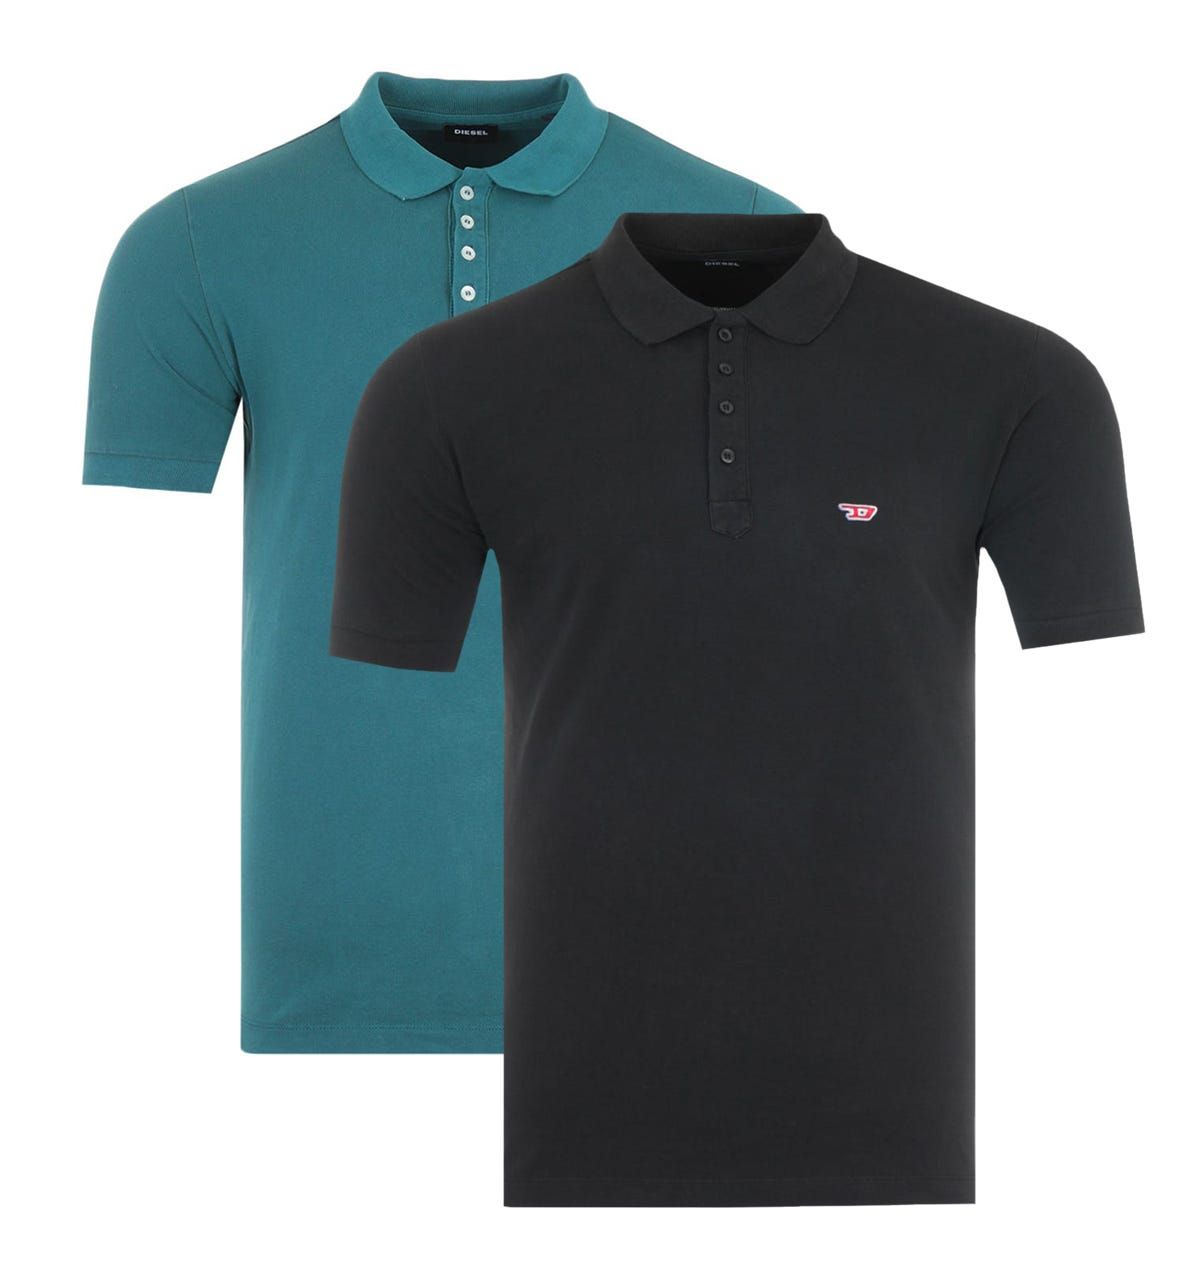 Crafted from pure cotton pique, this classic polo shirt from Diese is the ideal piece to refresh your polo shirt collection. Featuring a rib-knit collar, four button placket and shorts sleeves with rib-knit cuffs. Finished with a \D\ Diesel logo embroidered at the chest.Two Pack, Regular Fit, Pure Cotton Pique, Rib-knit Spread Collar, Four Button Placket, Short Sleeves with Rib-knit Cuffs, Diesel Branding. Style & Fit:Regular Fit, Fits True to Size. Composition & Care:100% Cotton, Machine Wash.